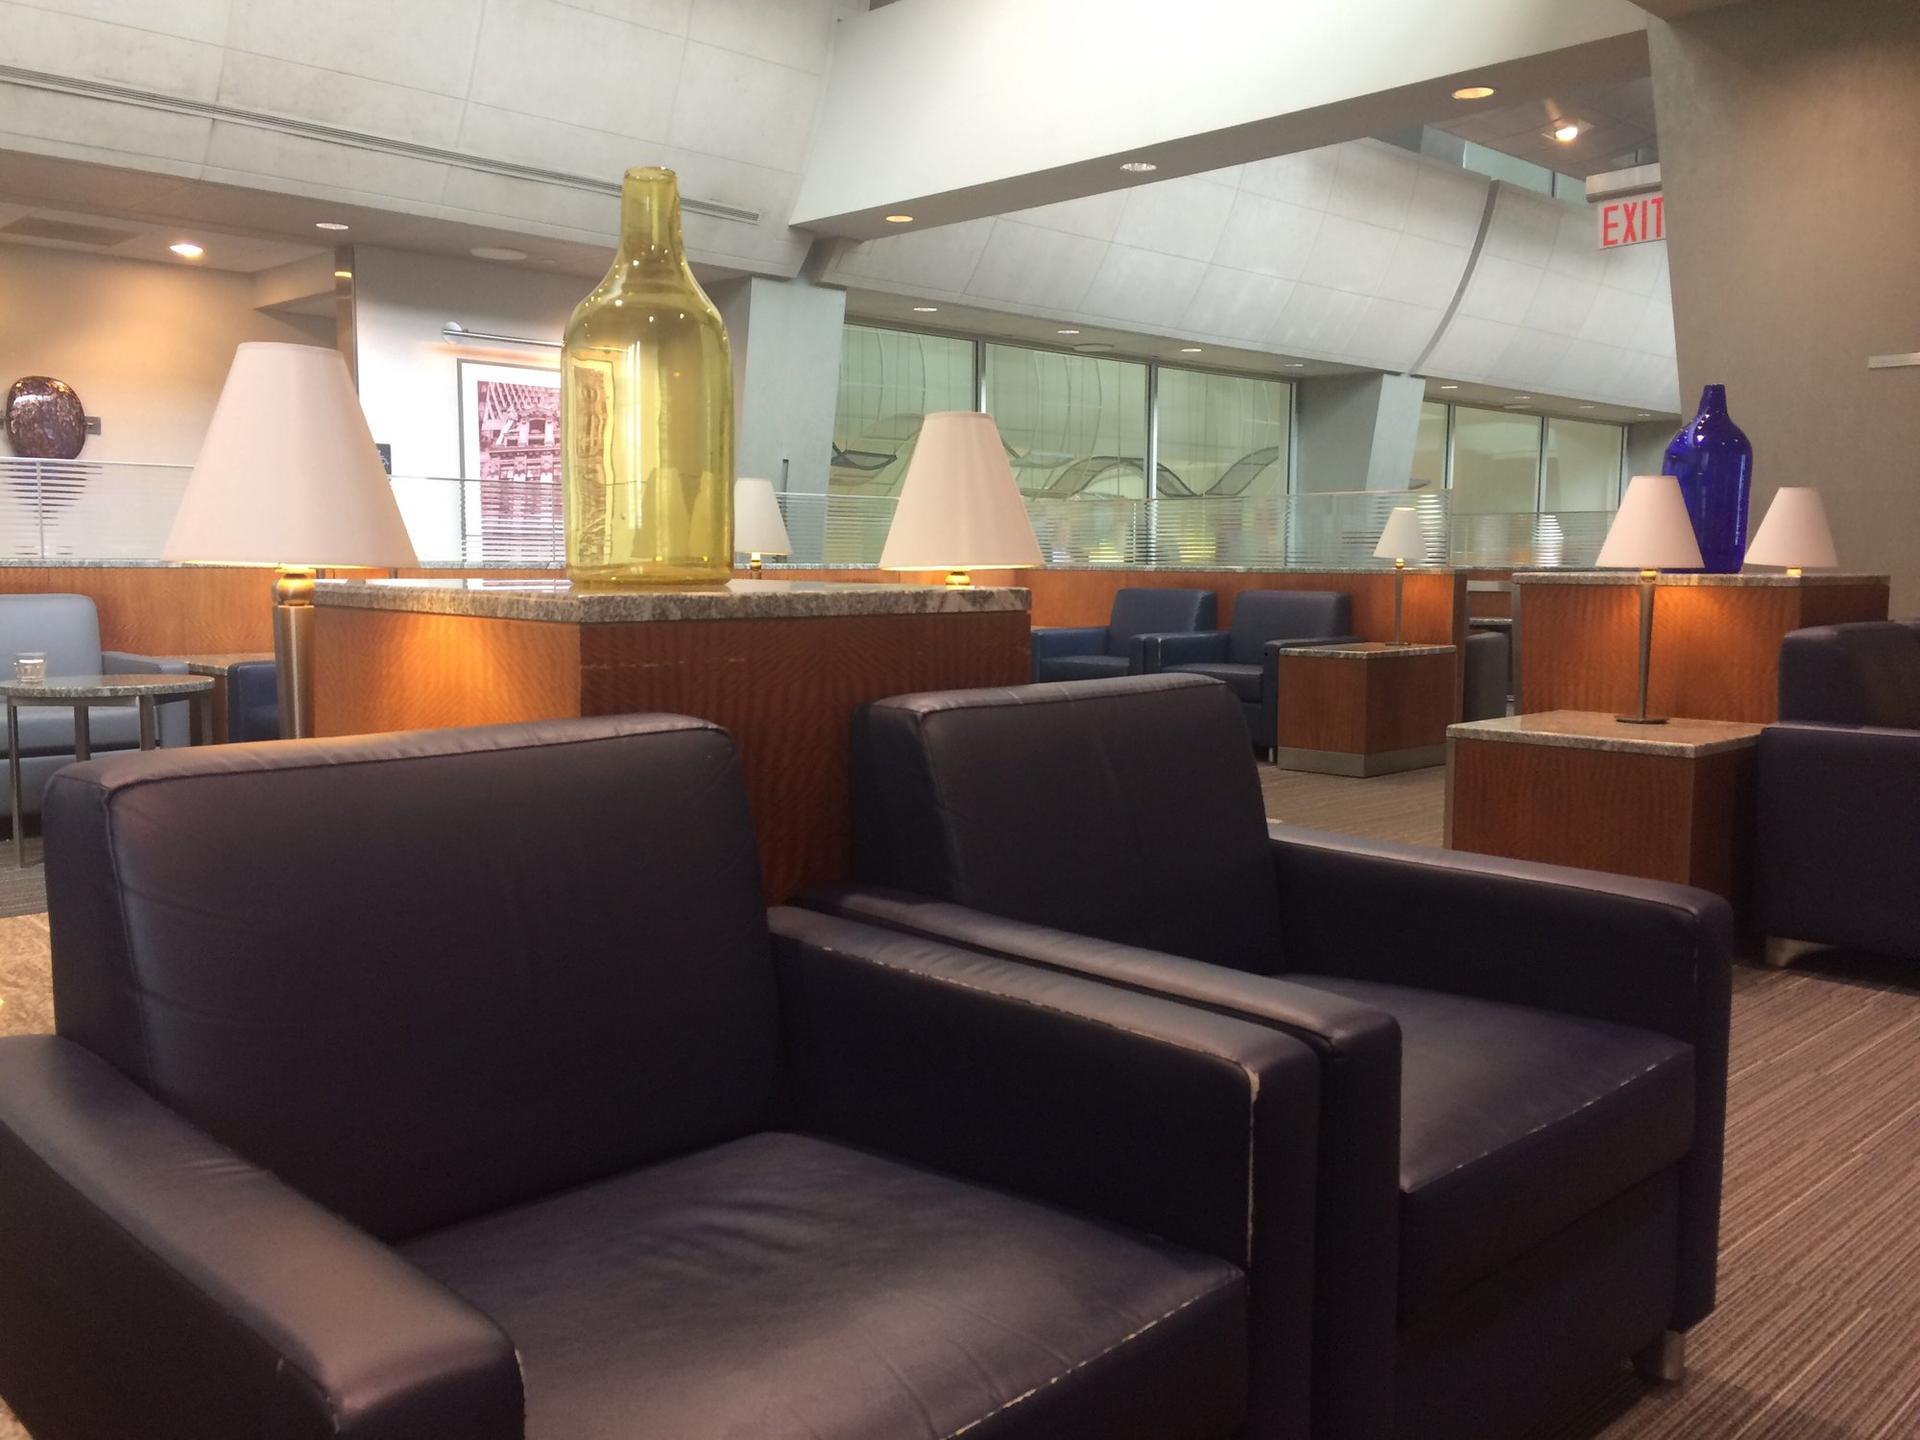 American Airlines Admirals Club image 44 of 48